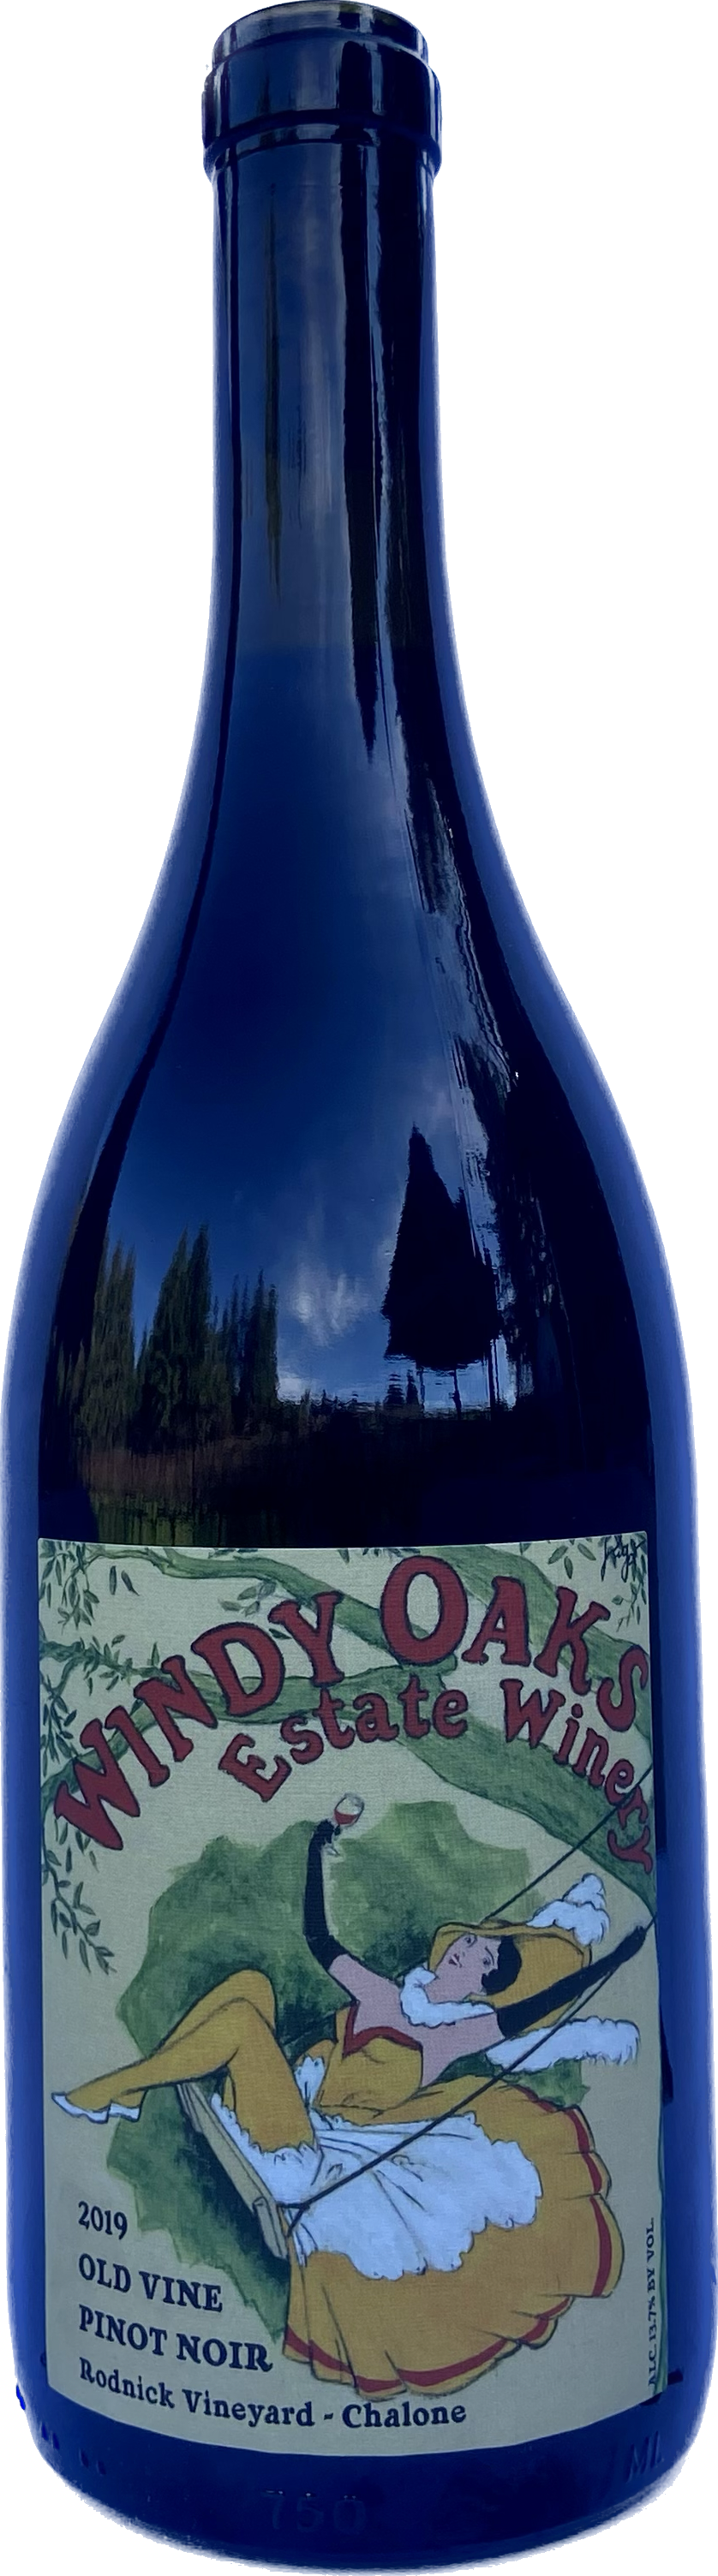 Product Image for 2019 Pinot Noir, Old Vine, Chalone